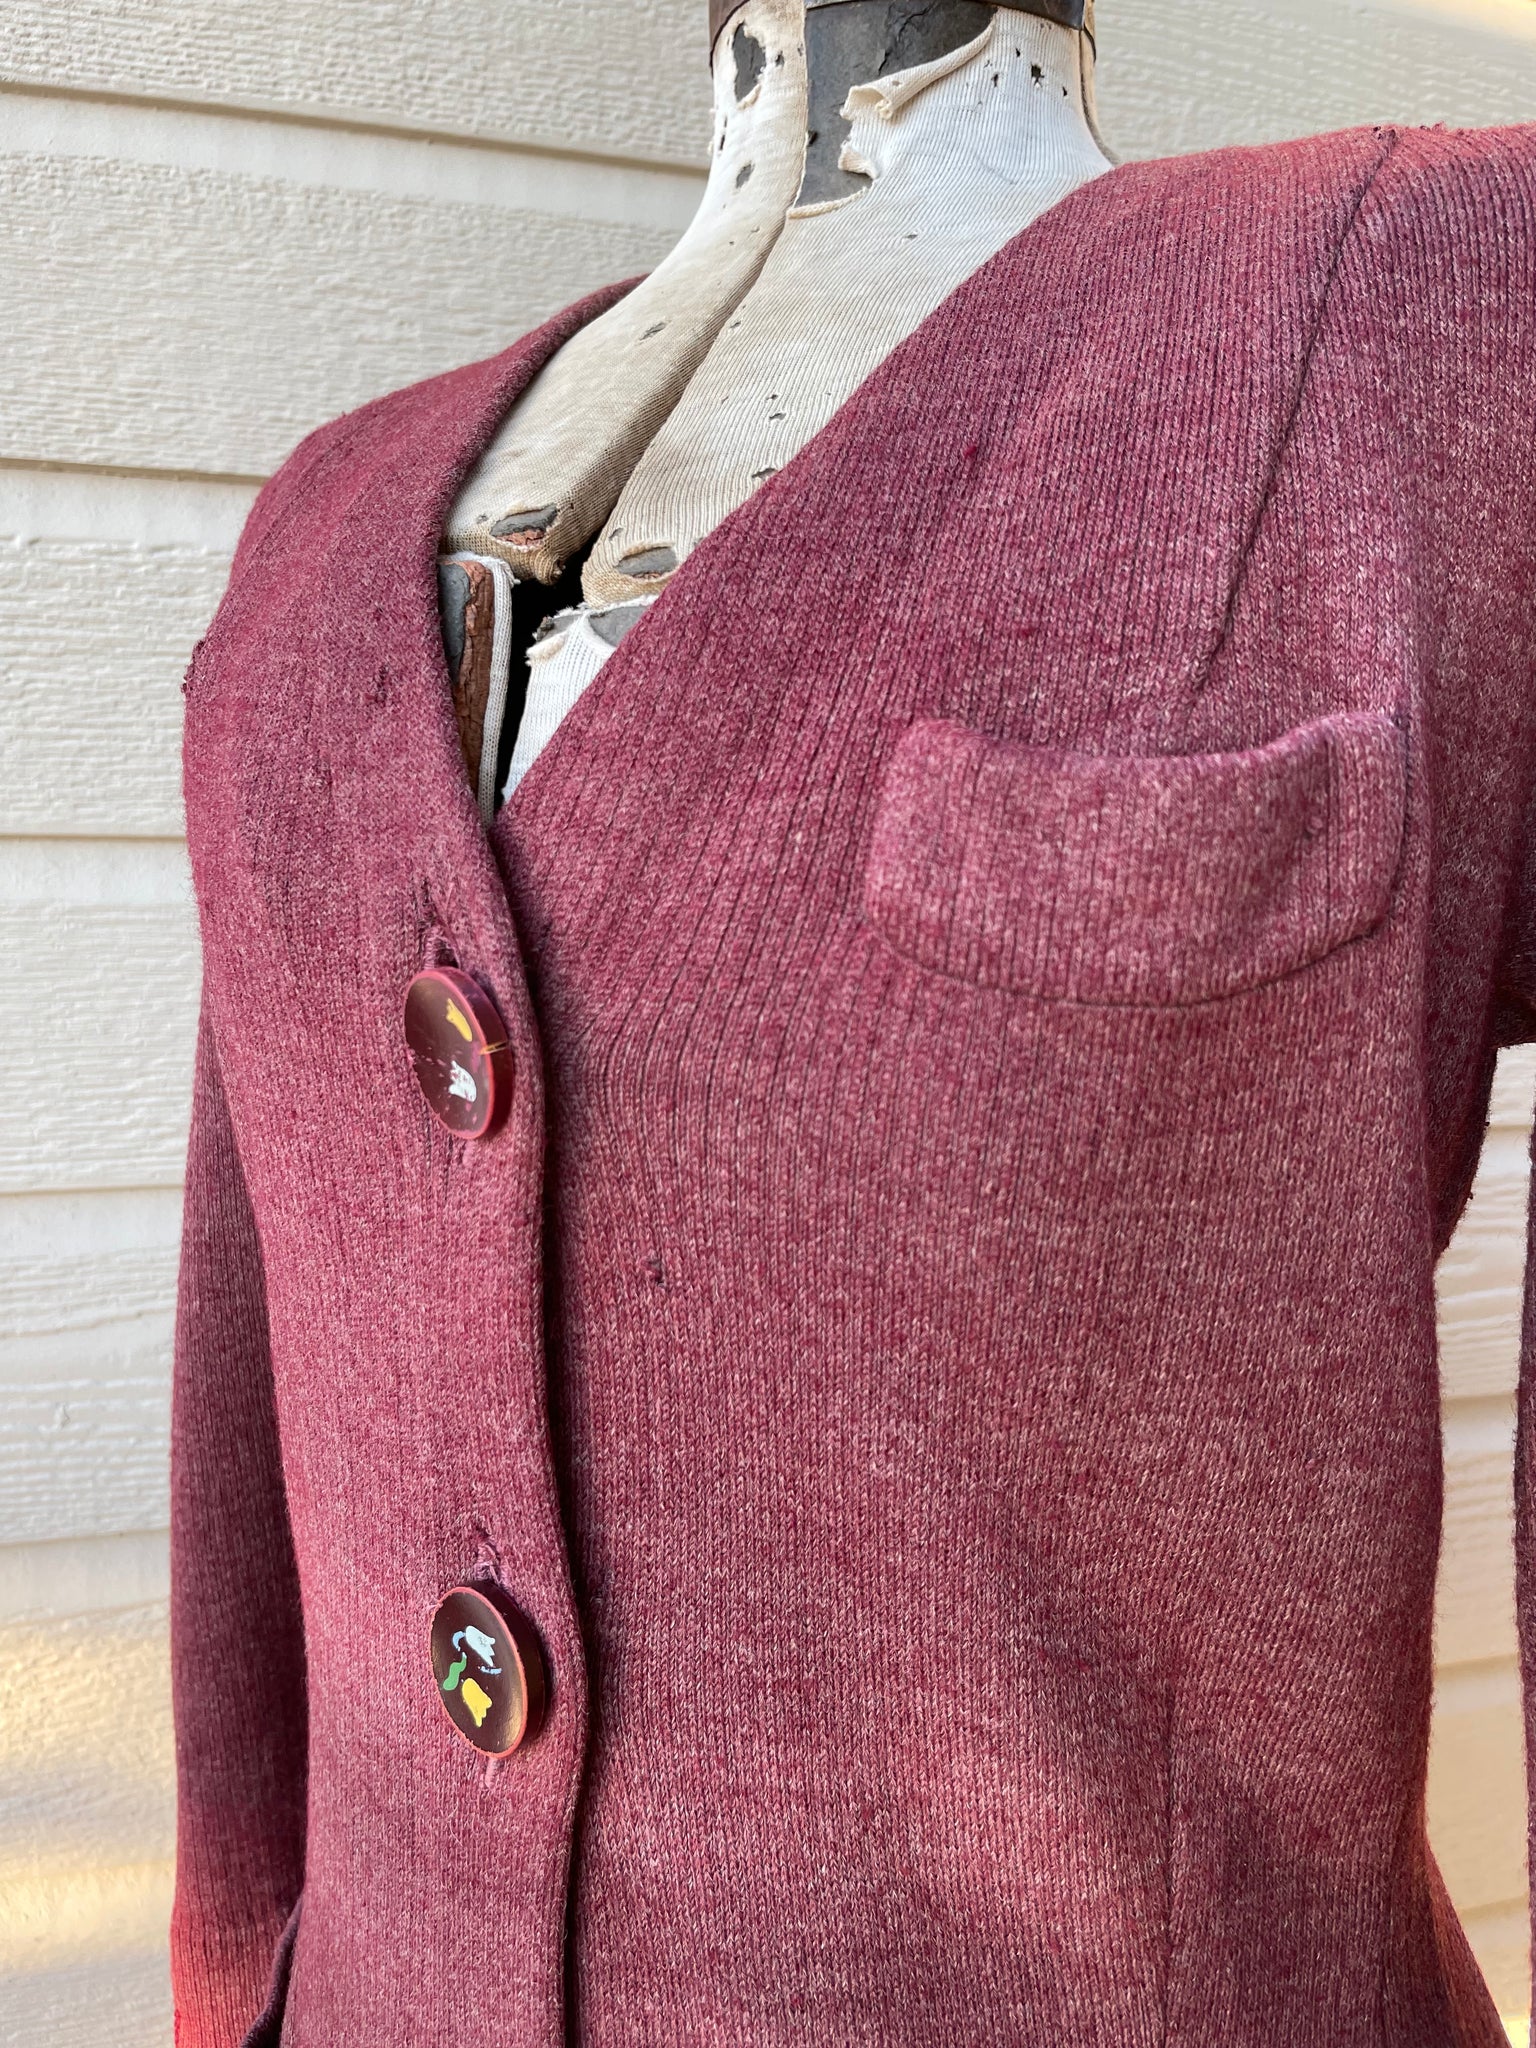 RESERVED- 1920s/1930s Maroon Knit Button Front Cardigan